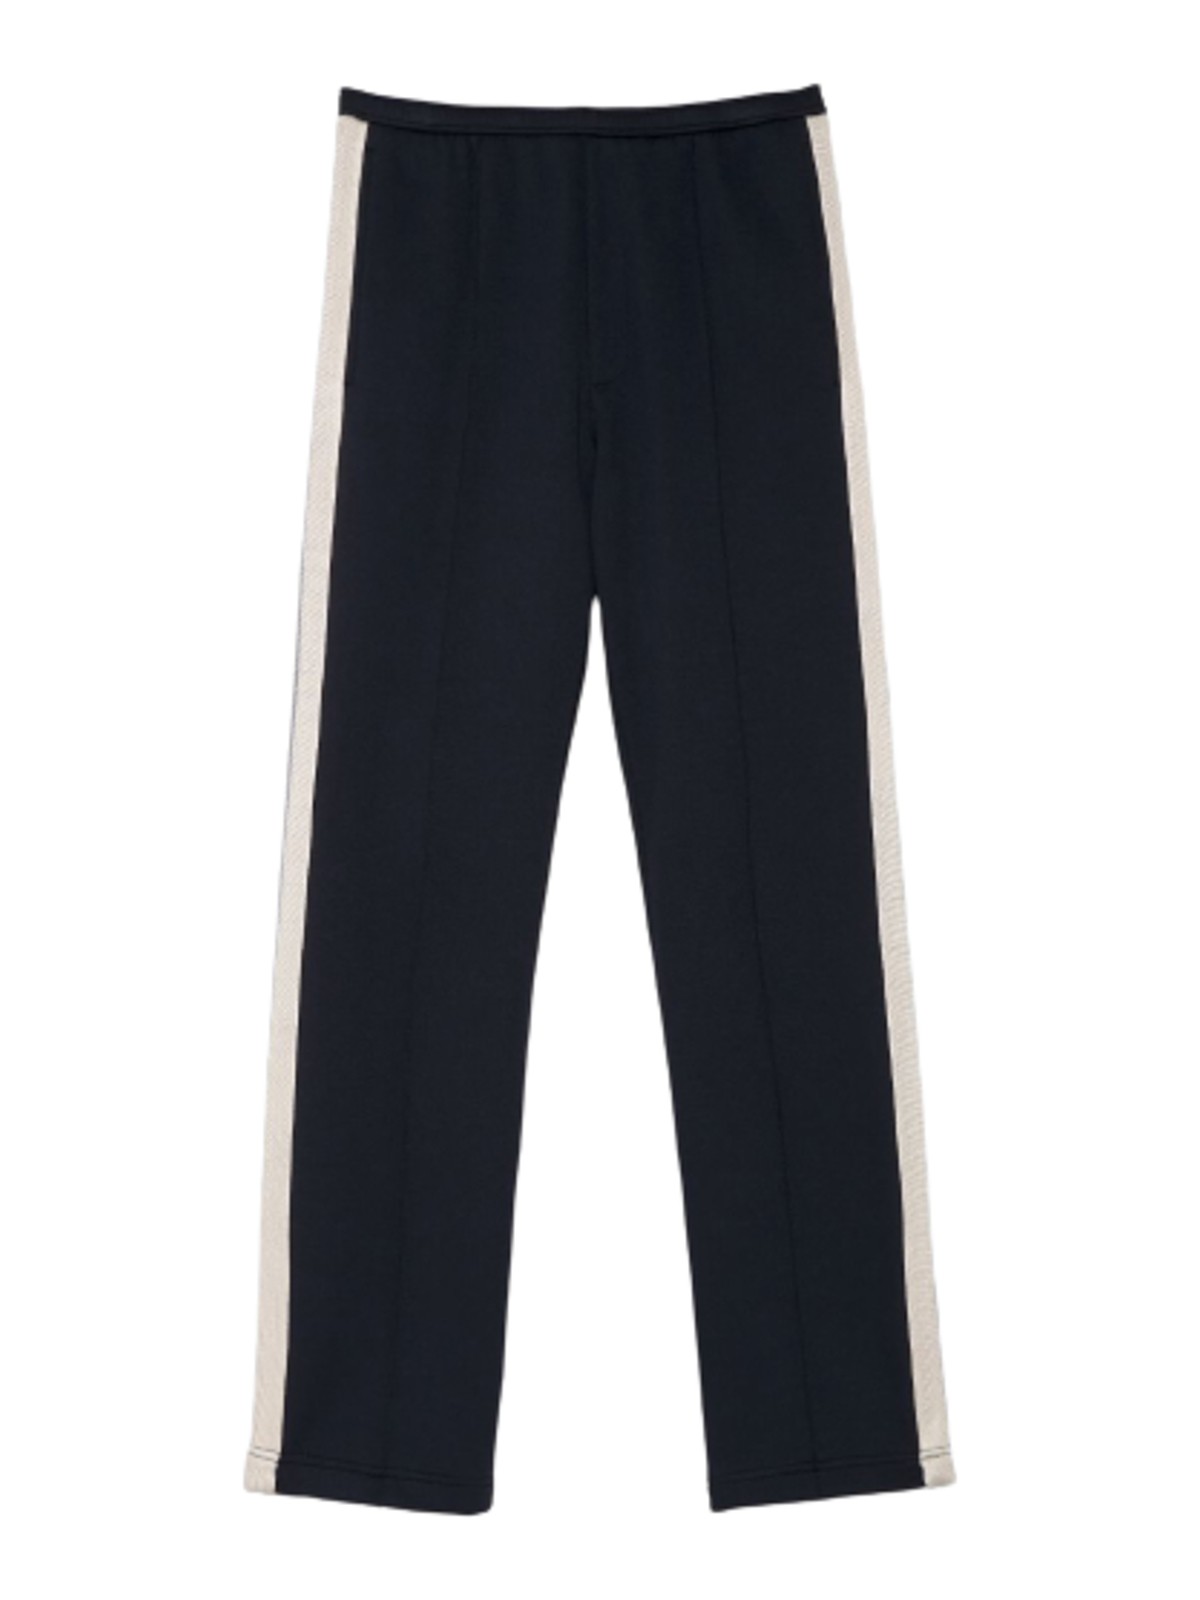 Canterbury Women's Club Fitted Track Pants Navy Blue